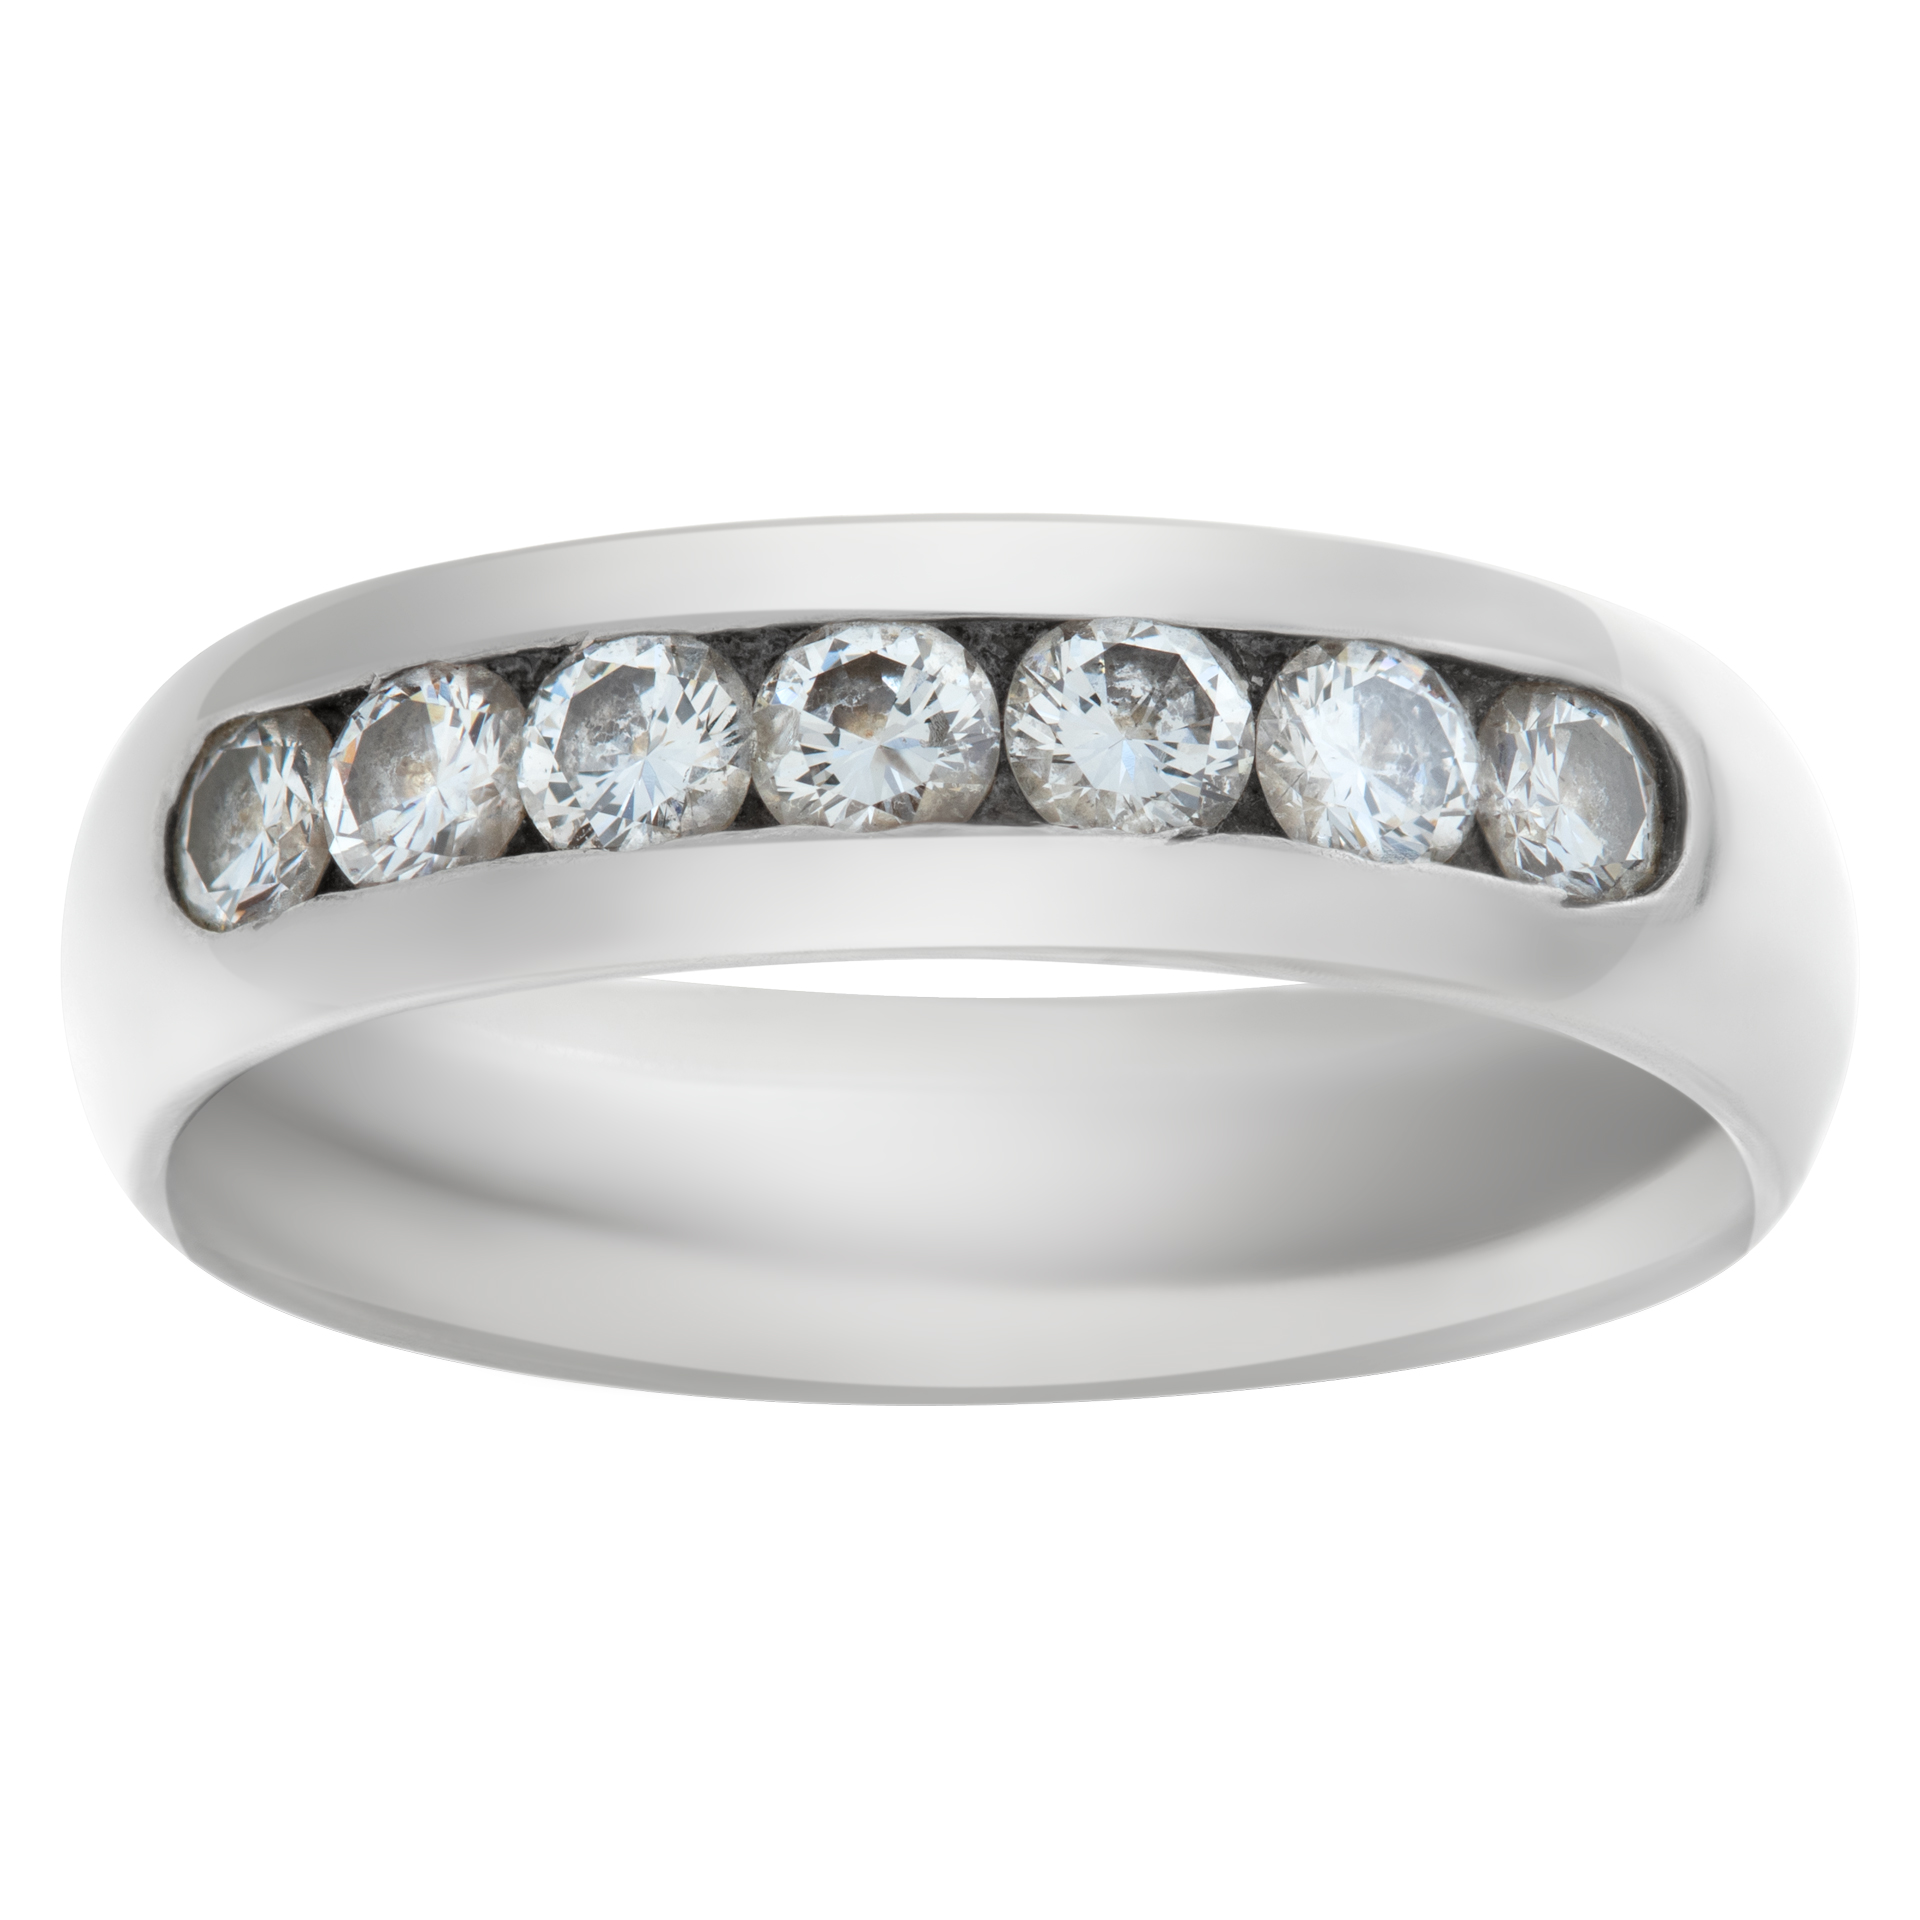 Channel set diamond ring in platinum with approximately 0.49 carats in round diamonds (G-H color, VS-SI clarity). Width 5 mm. Ring size 5. image 1